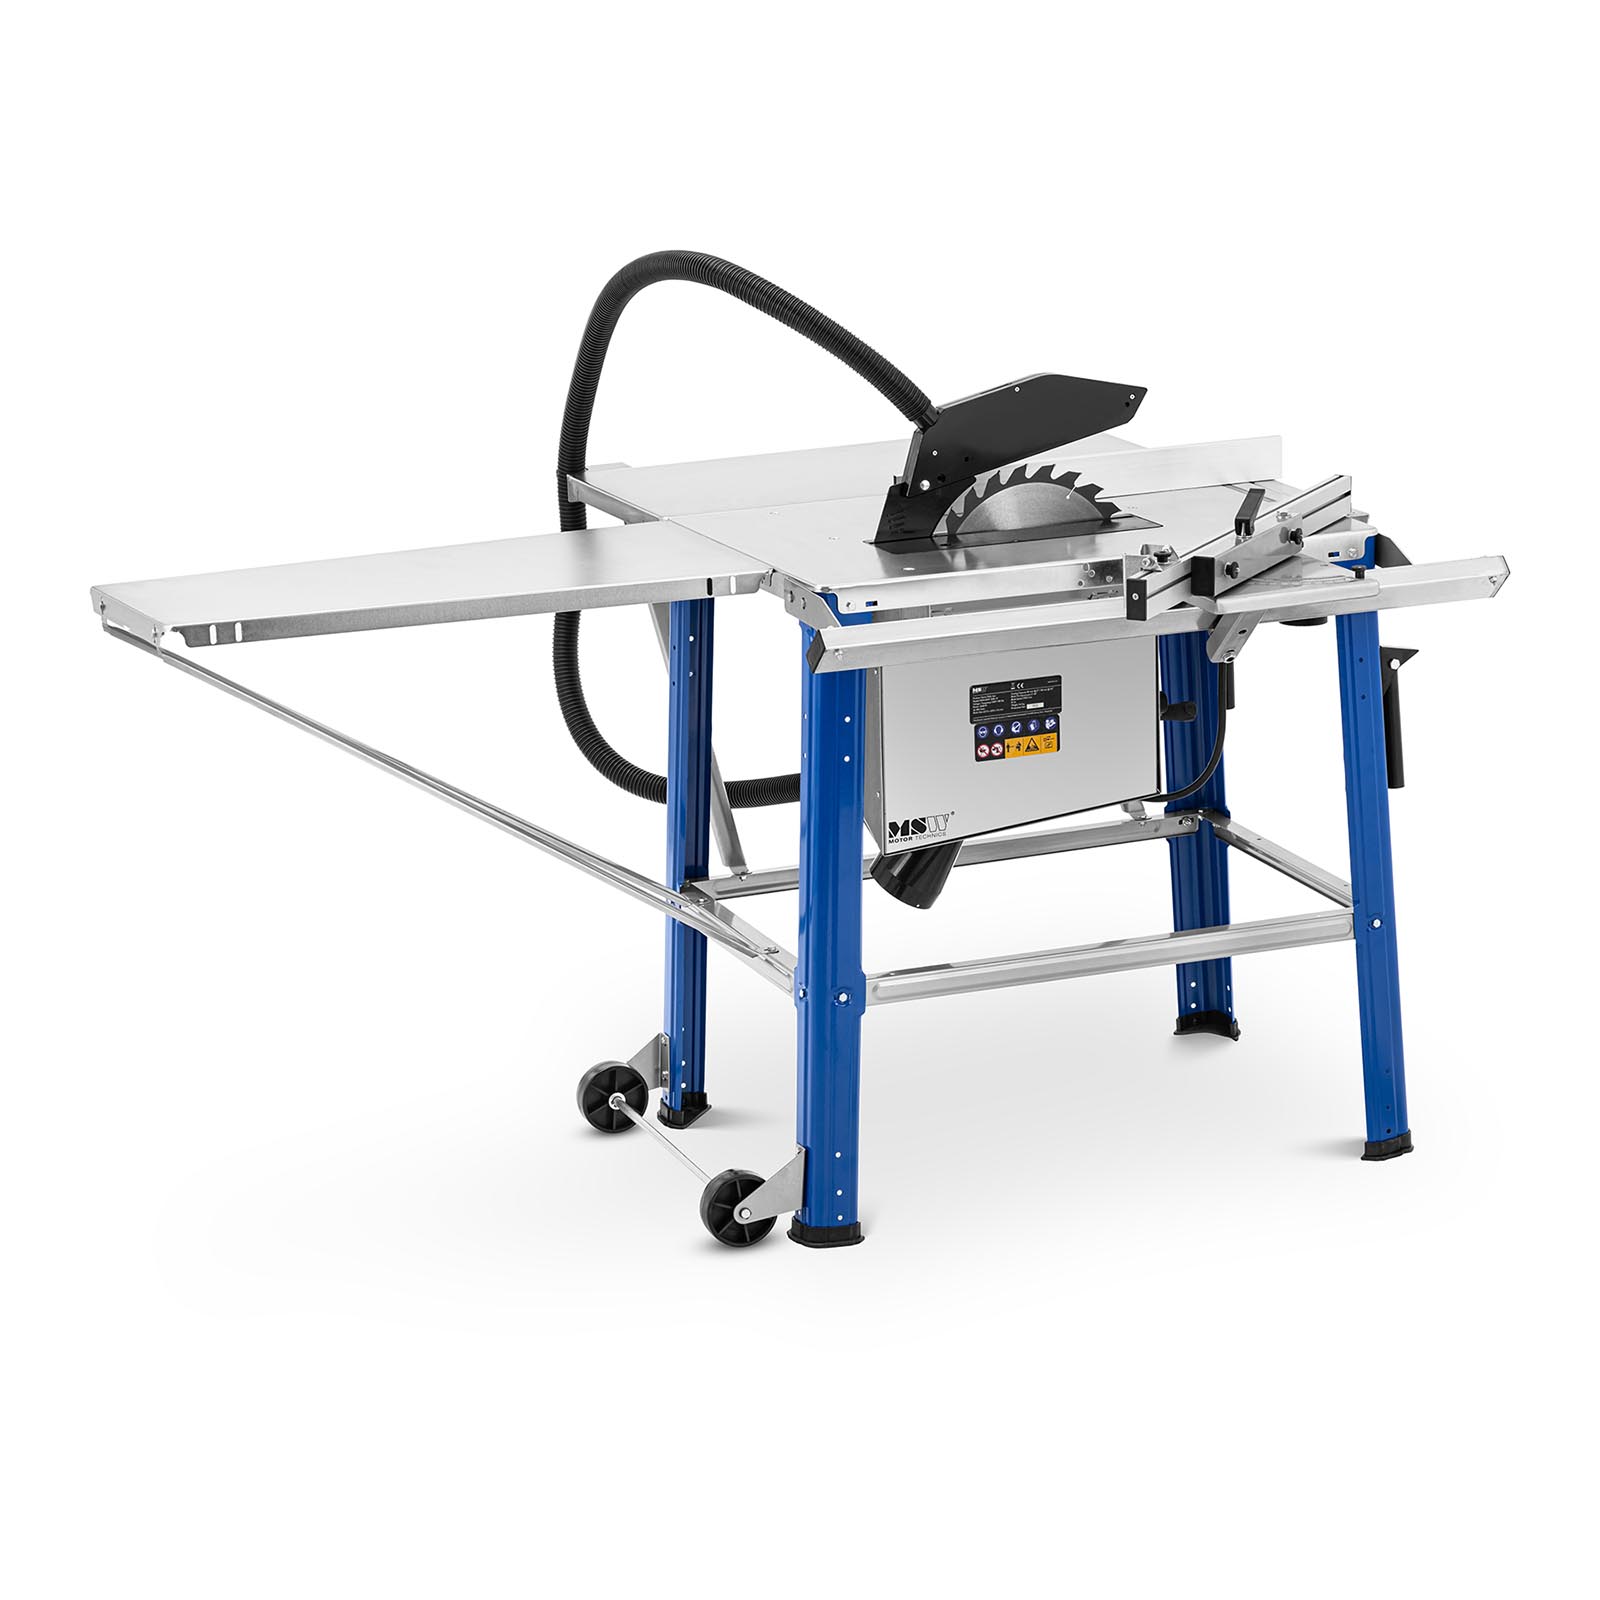 Table Saw - 2200 W - 2991 rpm - table top extendable